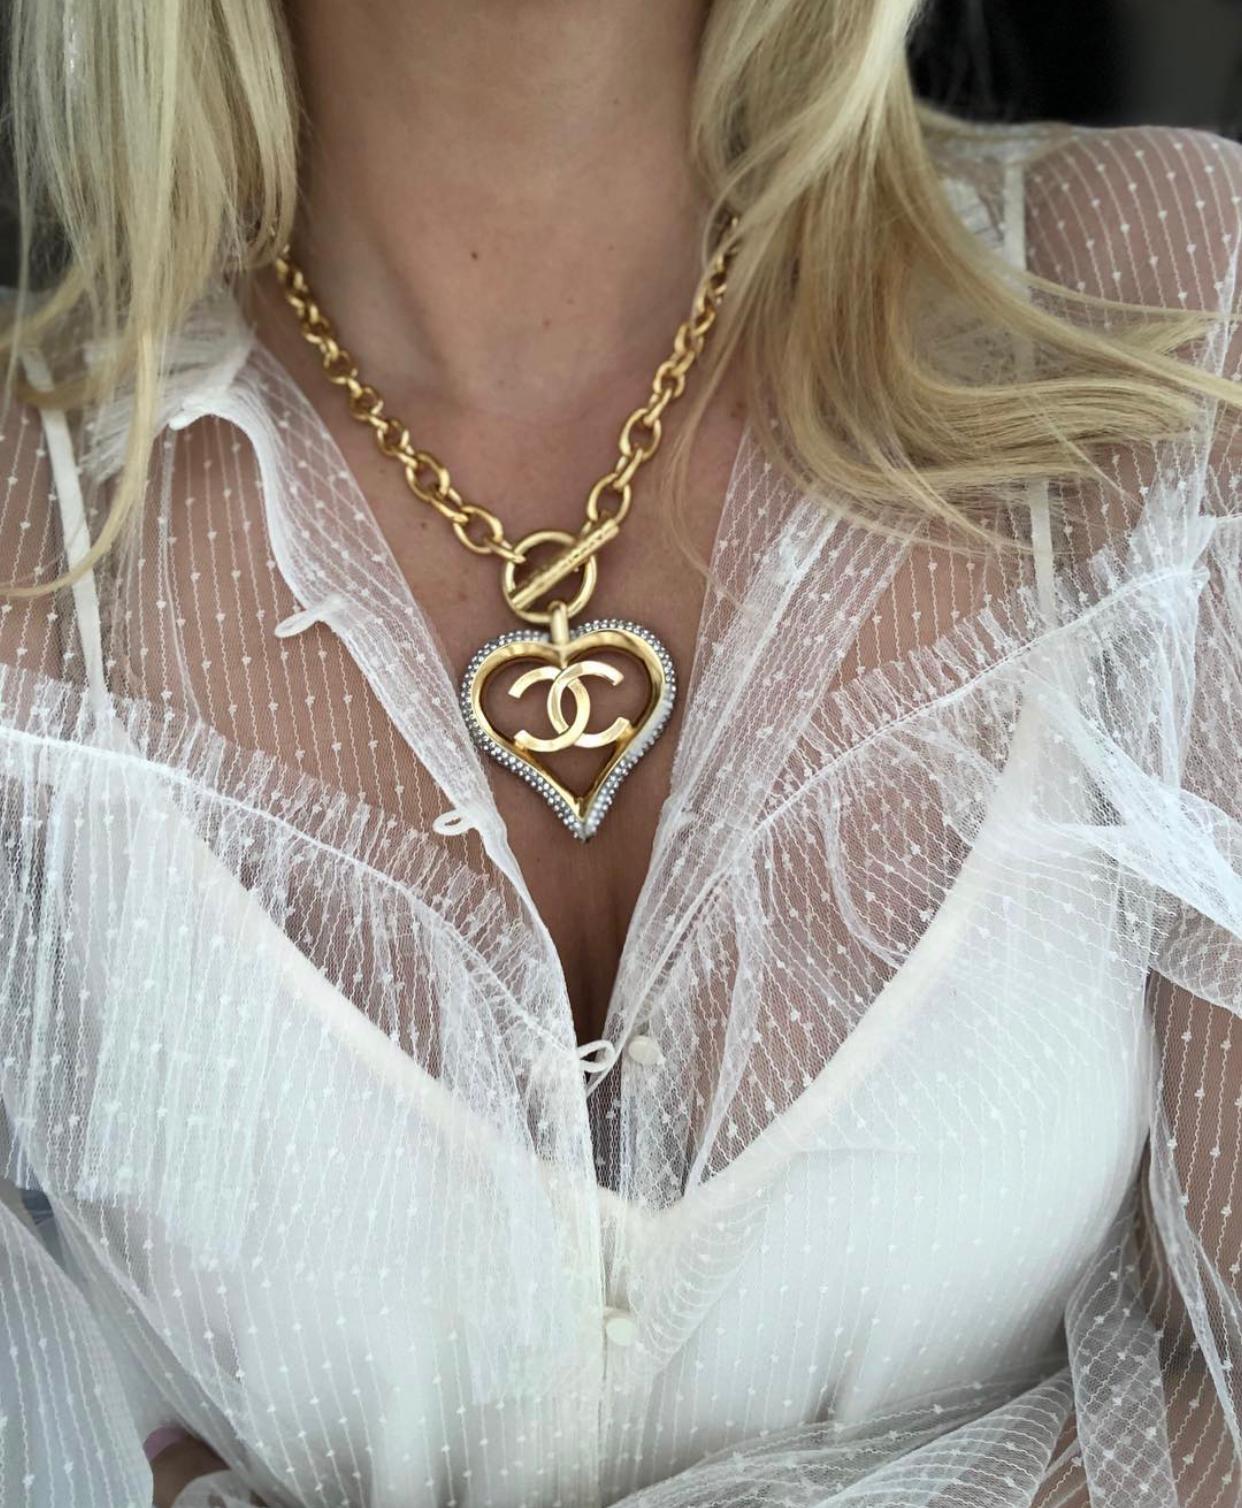 Chanel Chanel Heart Necklace - ADL1604